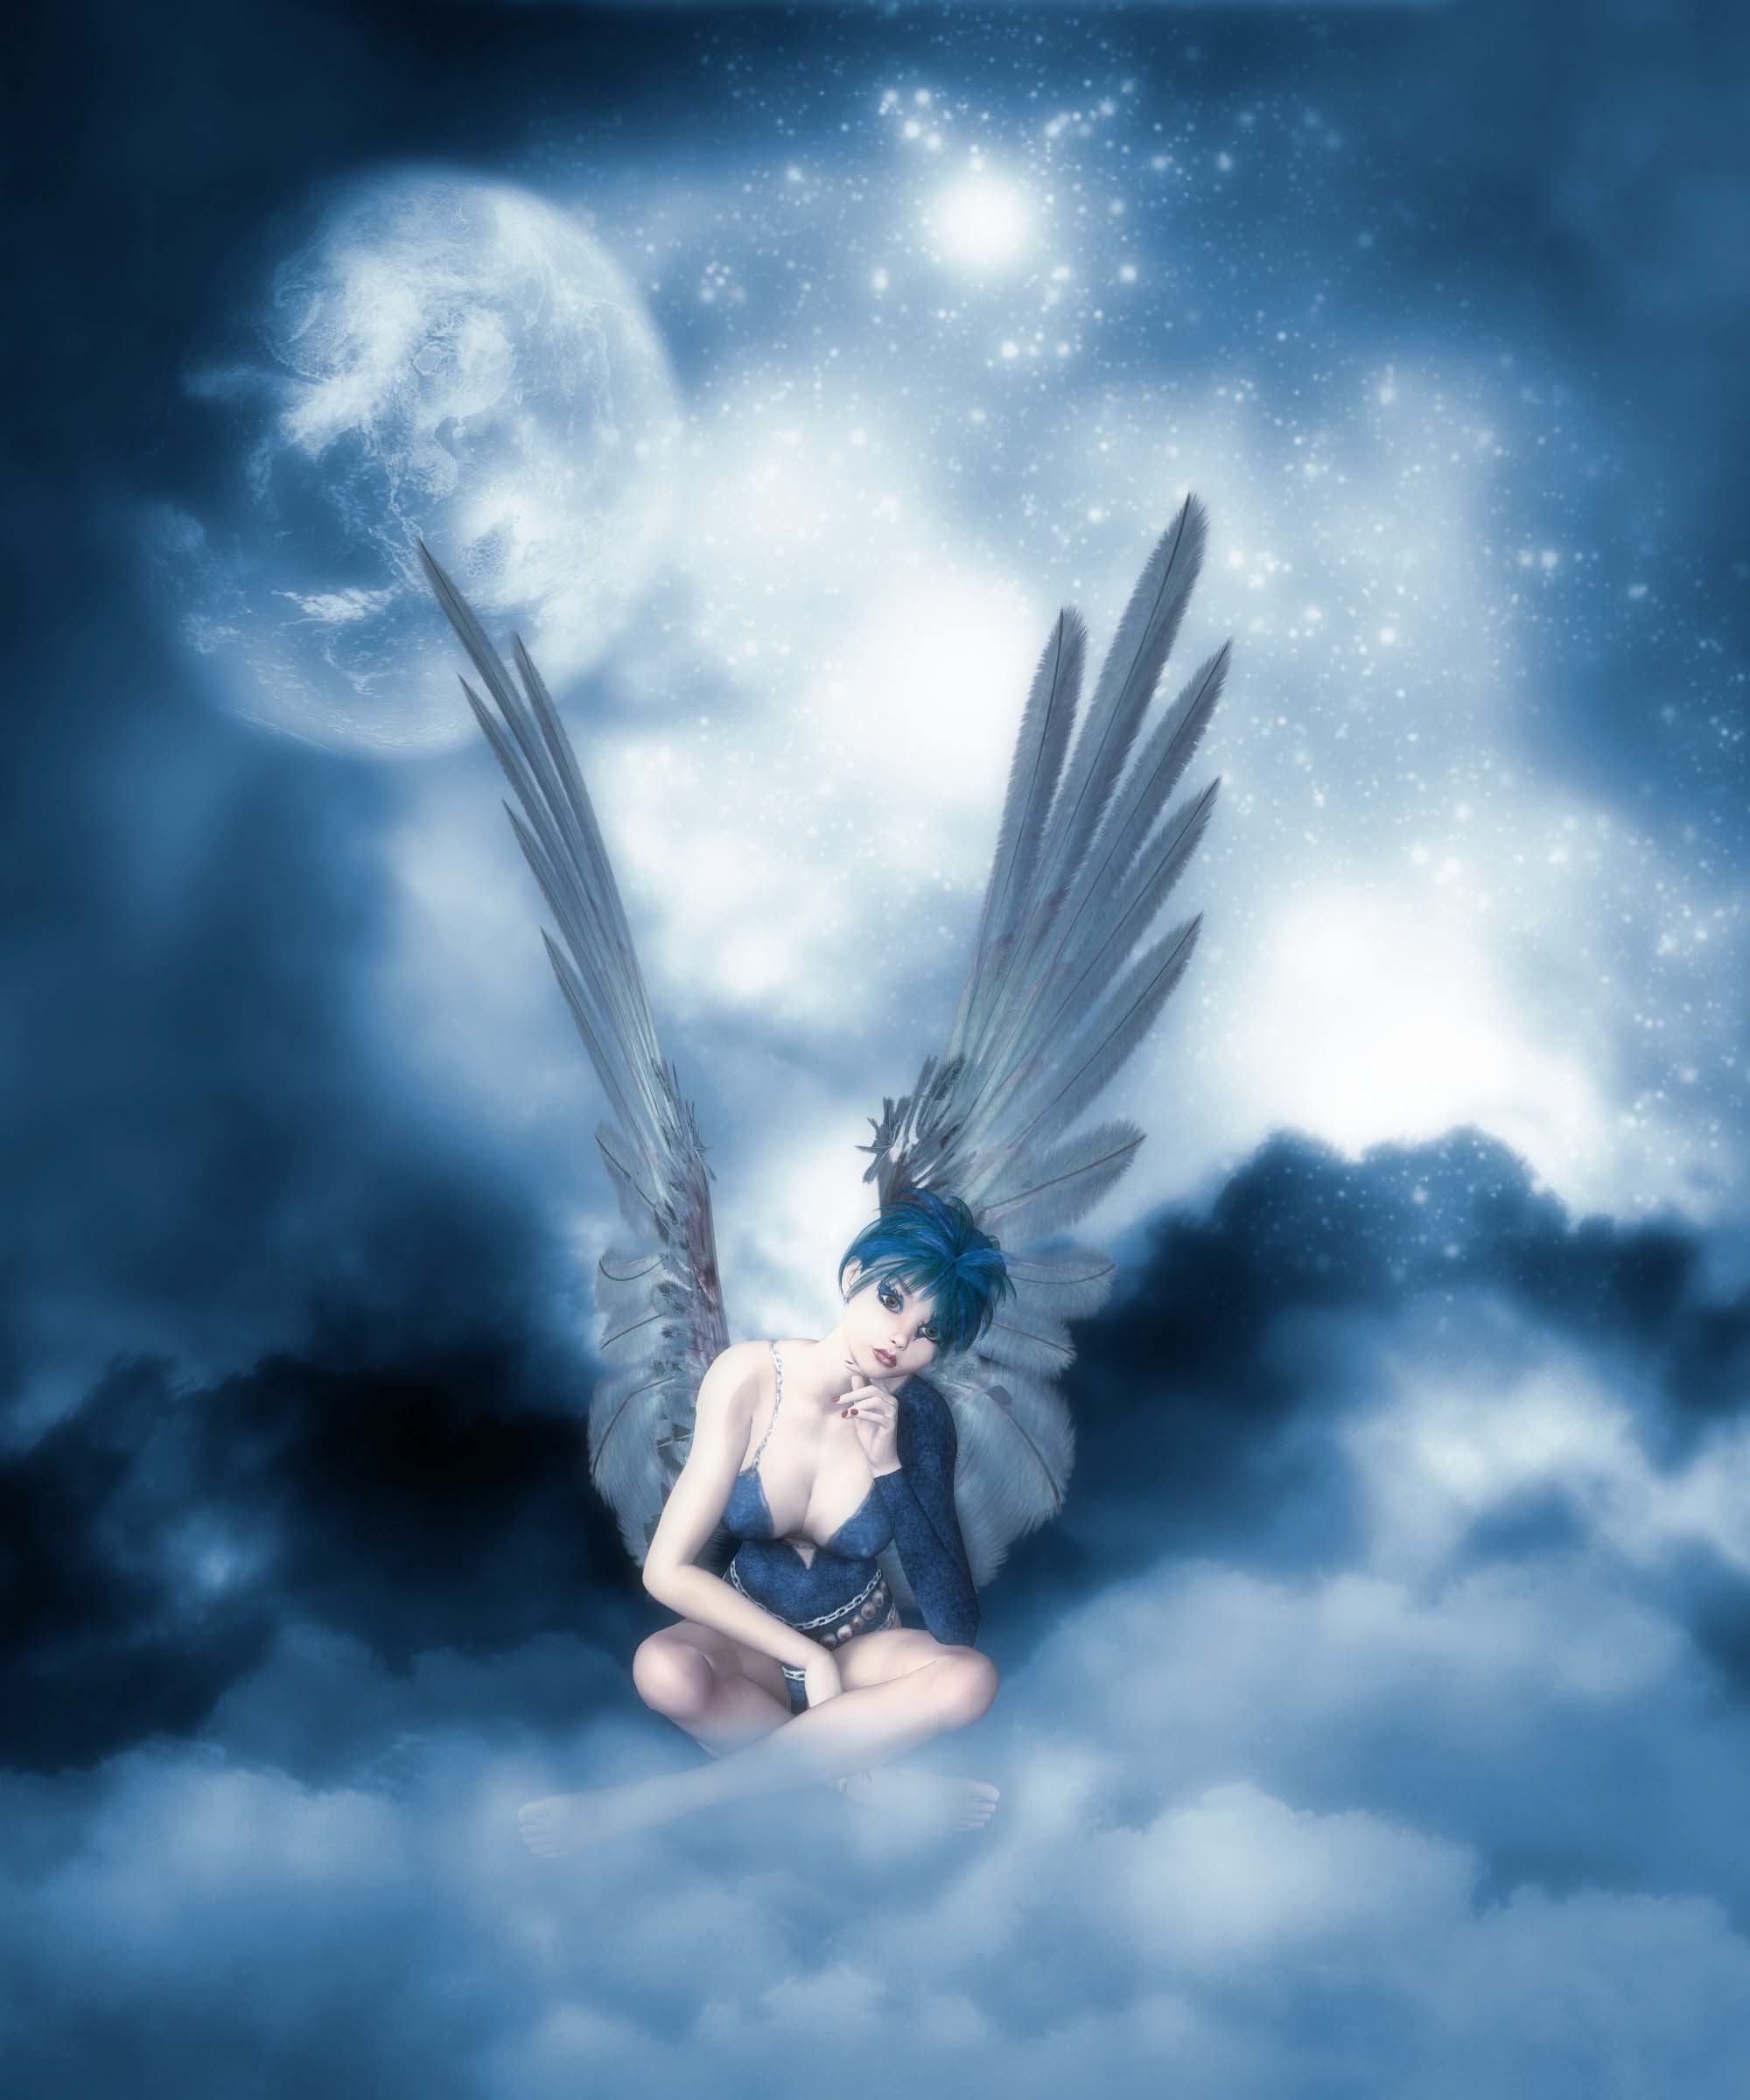 Image detail for angels sleep clouds